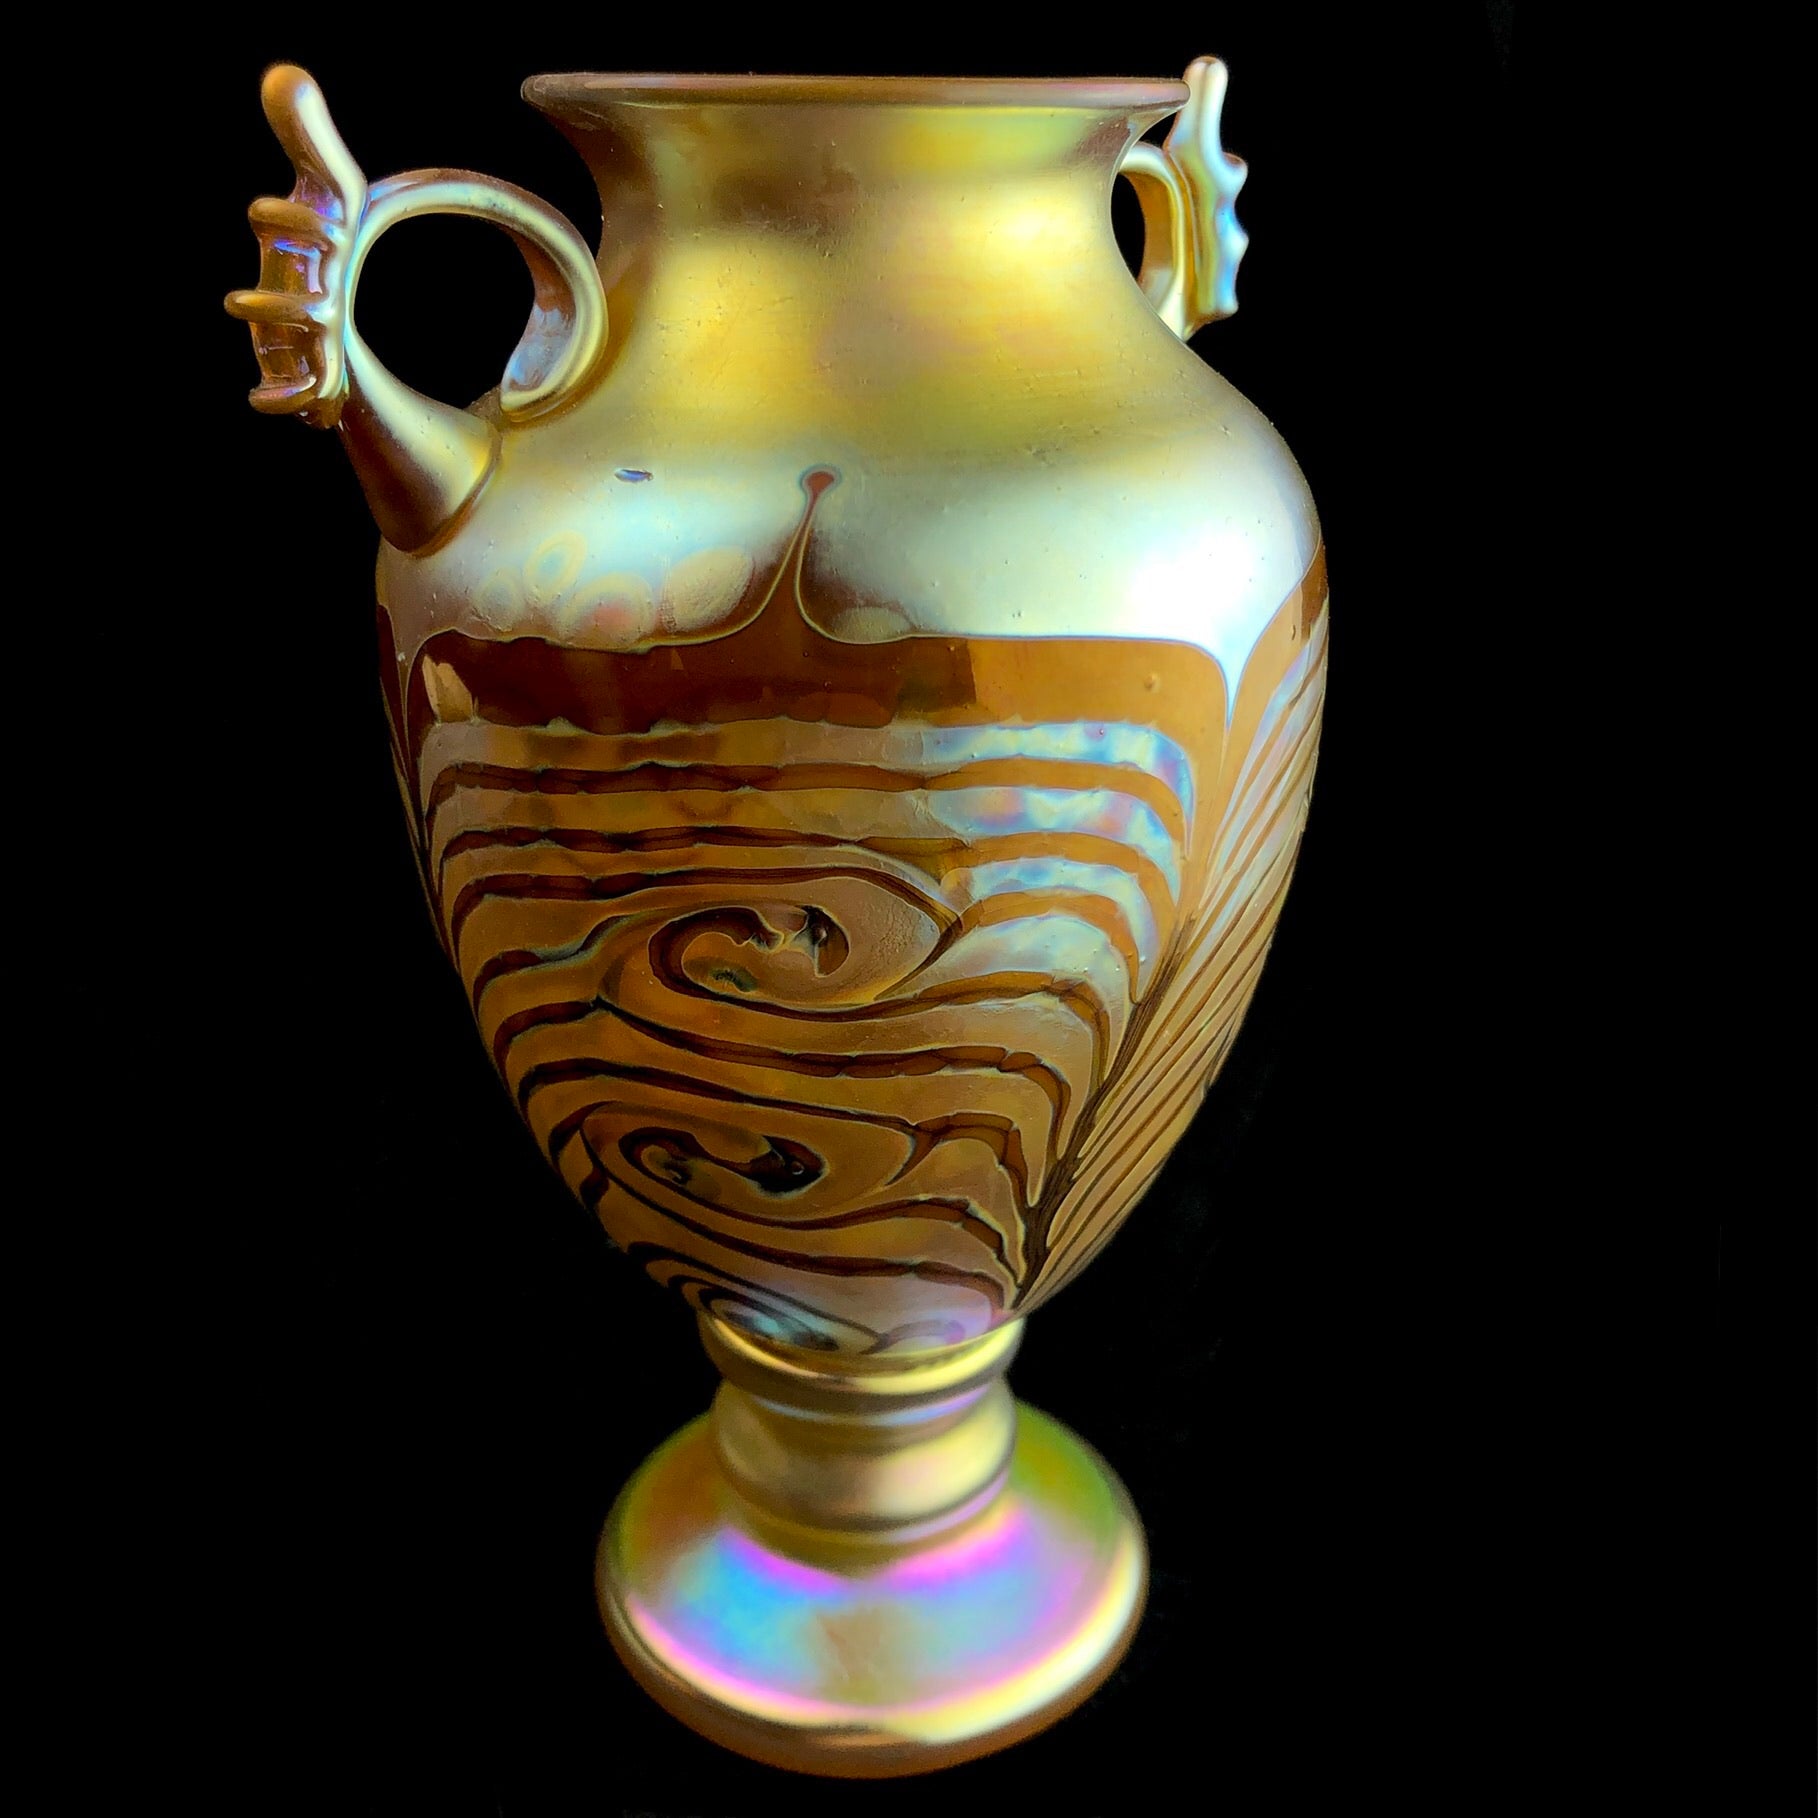 Side view of iridescent yellow vase with feather shaped decoration and color variation in glass